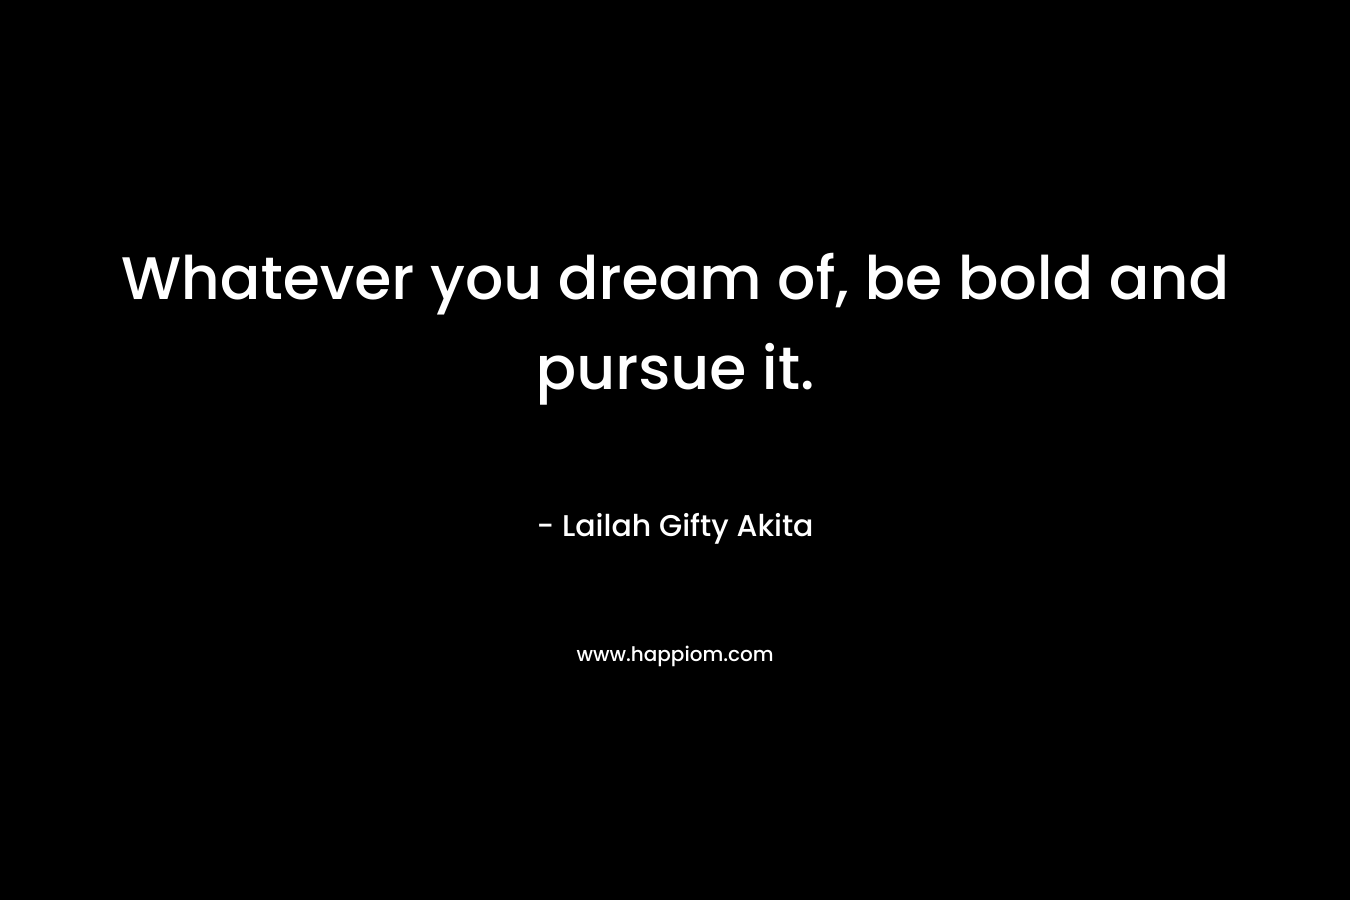 Whatever you dream of, be bold and pursue it.